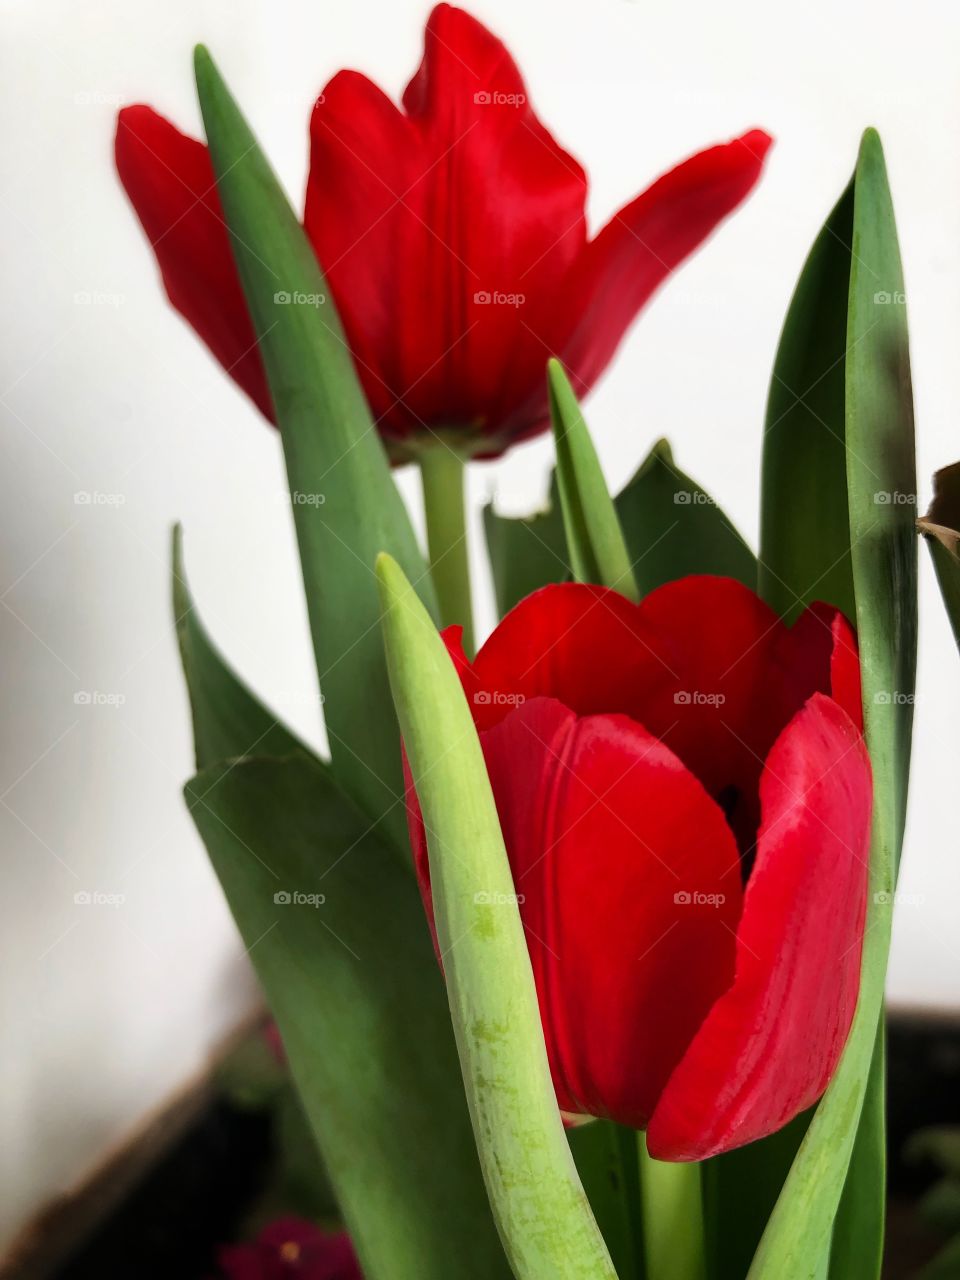 Tulips. Beautiful and Delicate flowers. Red Tulips mean true and eternal love. Romance is in the air...